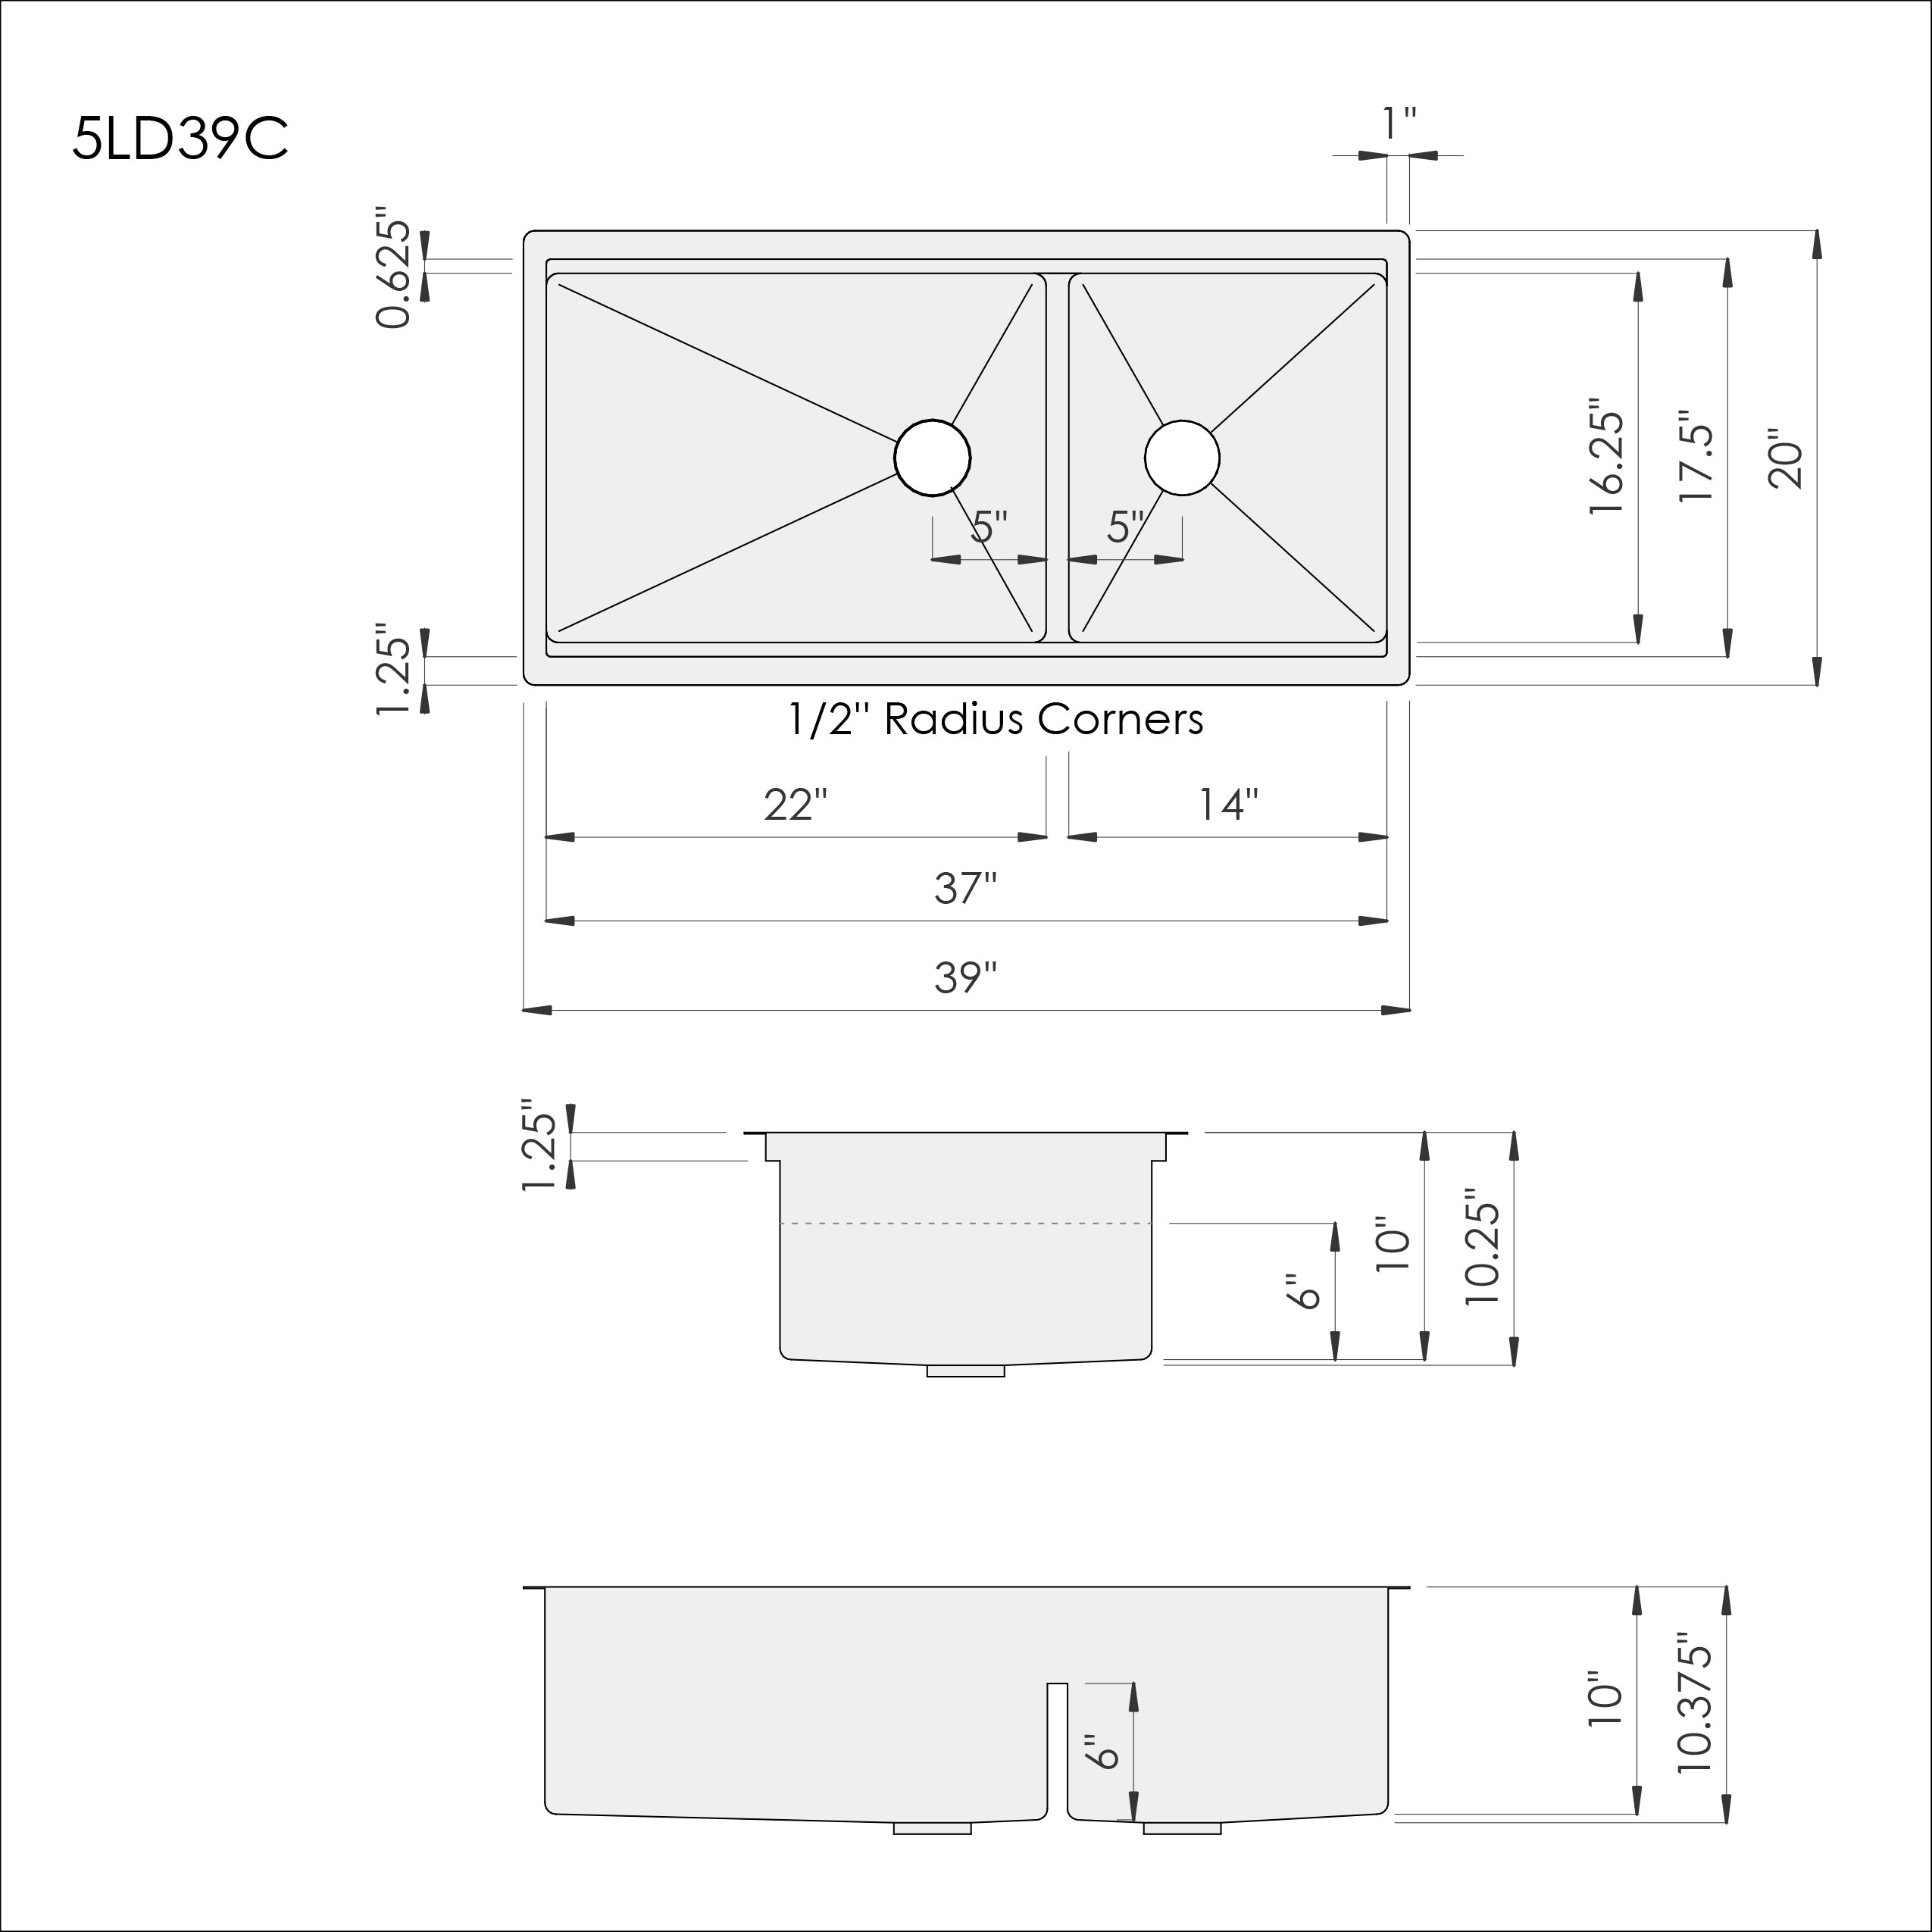 Dimensions of Create Good Sinks 39 inch stainless steel workstation kitchen sink. Double bowl sink with reversible design. Patented seamless drain and half inch radius corners. Smart low divider.